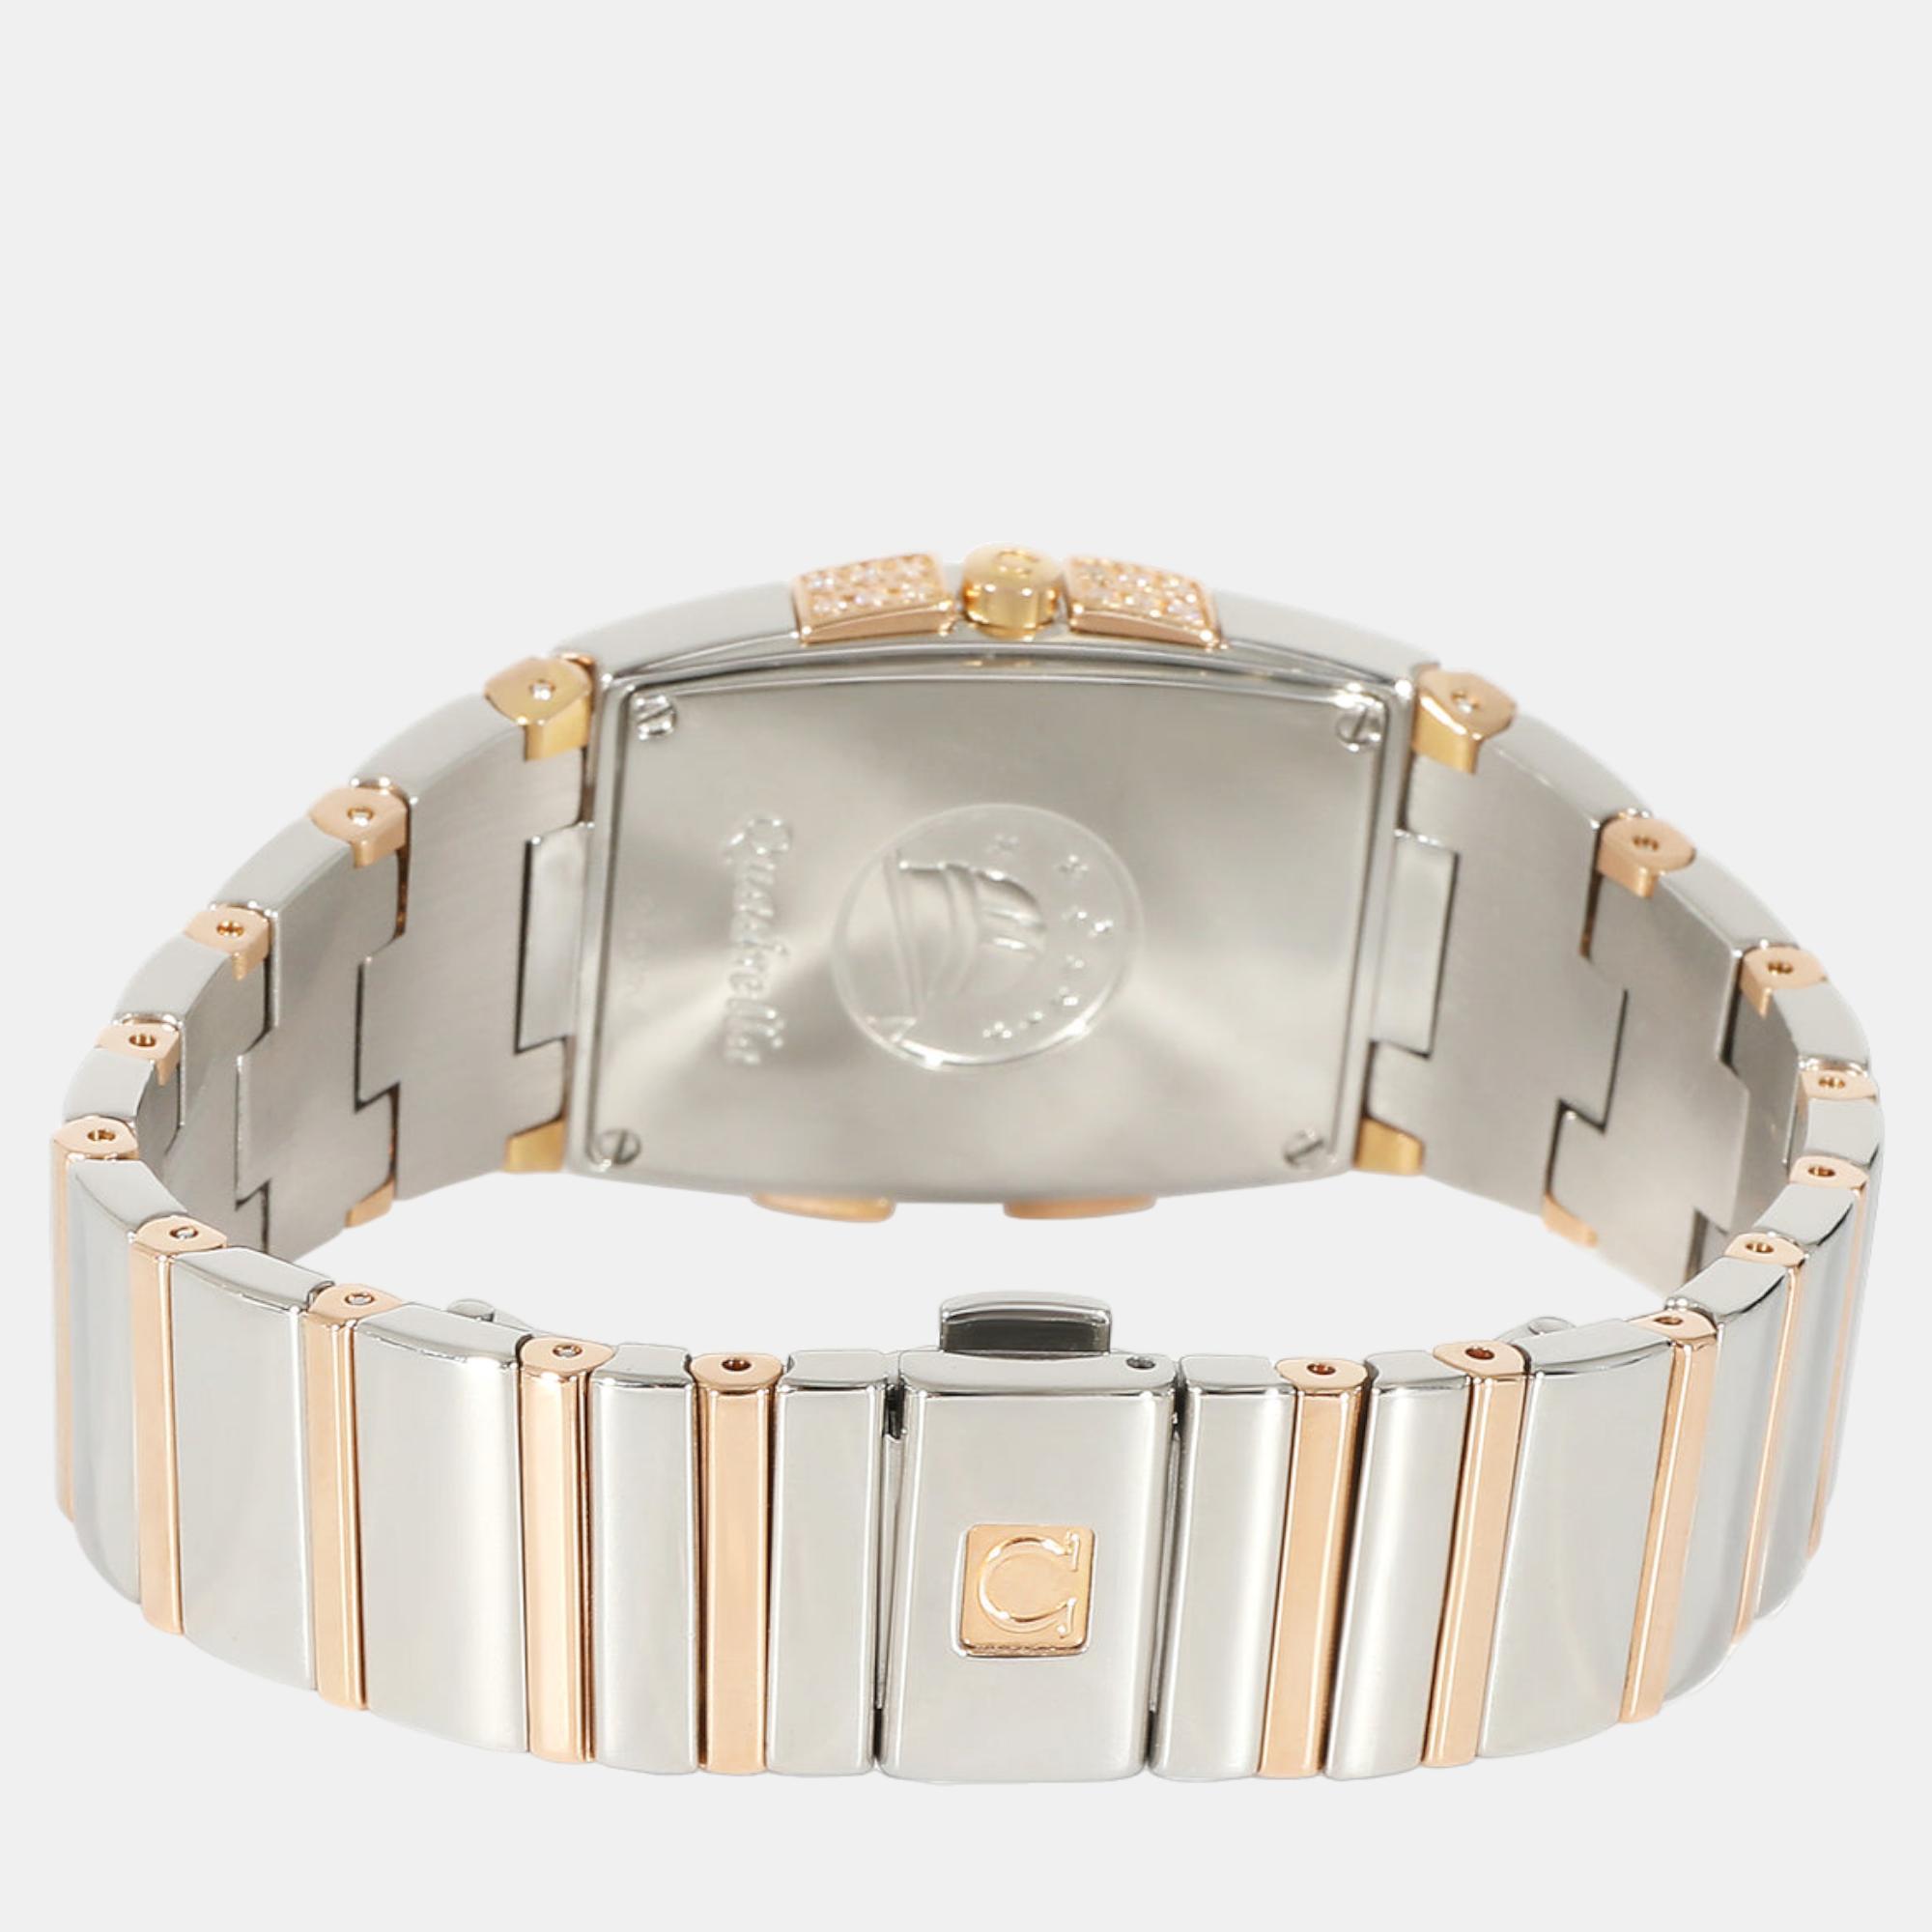 Omega White Mother Of Pearl 18k Rose Gold And Stainless Steel Constellation Quadrella 1286.75 Quartz Women's Wristwatch 25 Mm